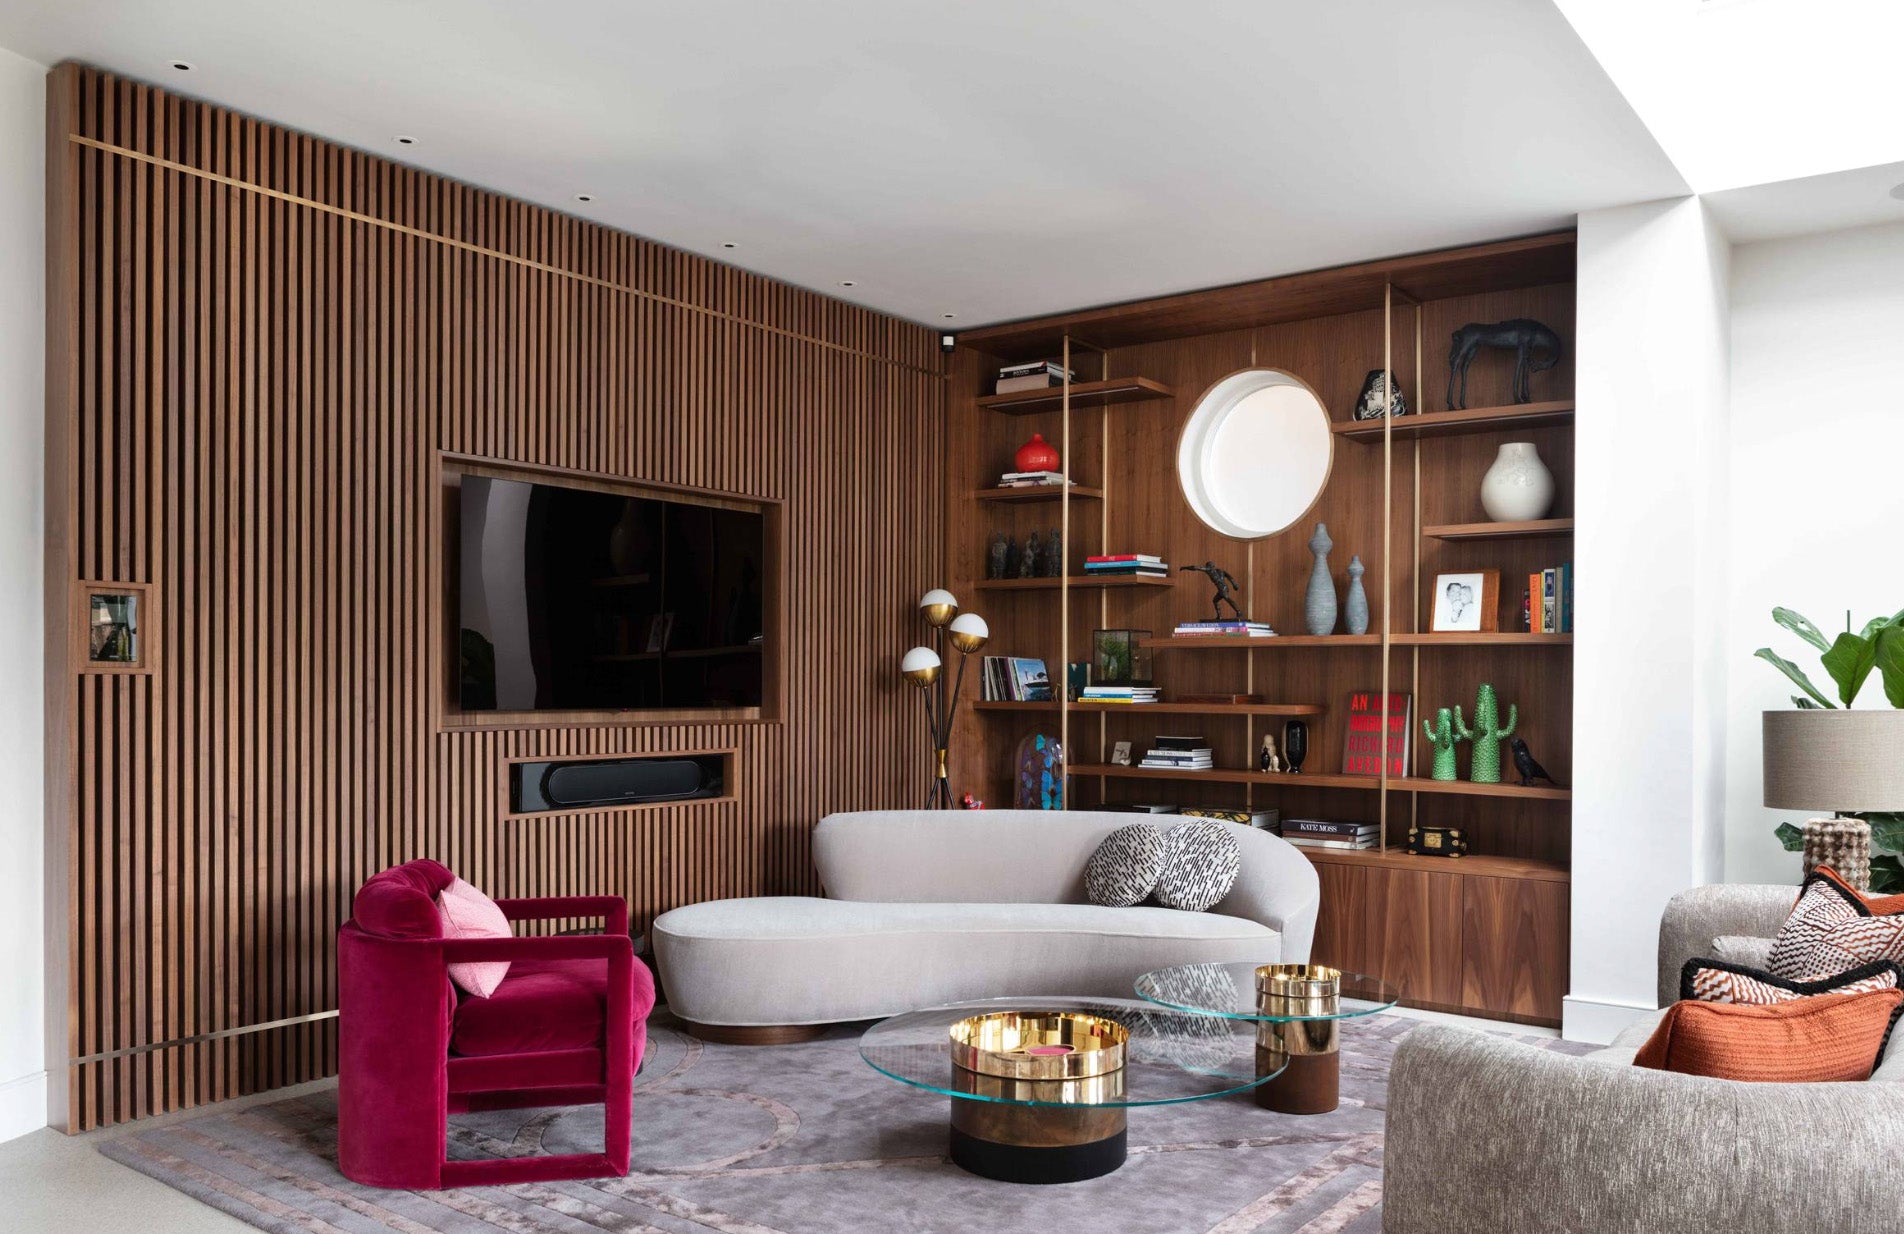 modern living room with built-in walnut shelving and a vertical wood slat accent wall